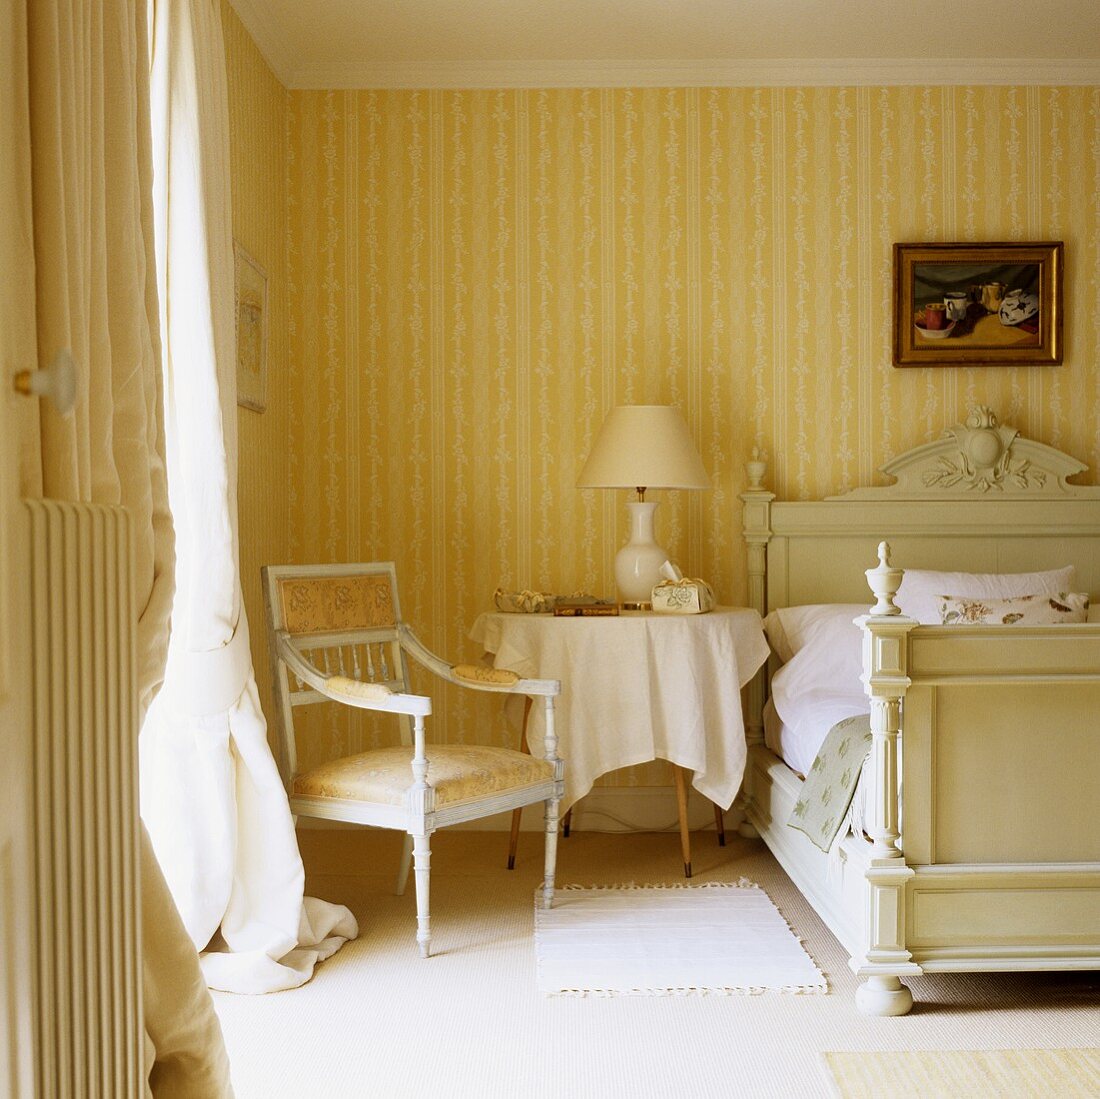 A bedroom in a country house with Baroque chairs against a yellow and white striped wall